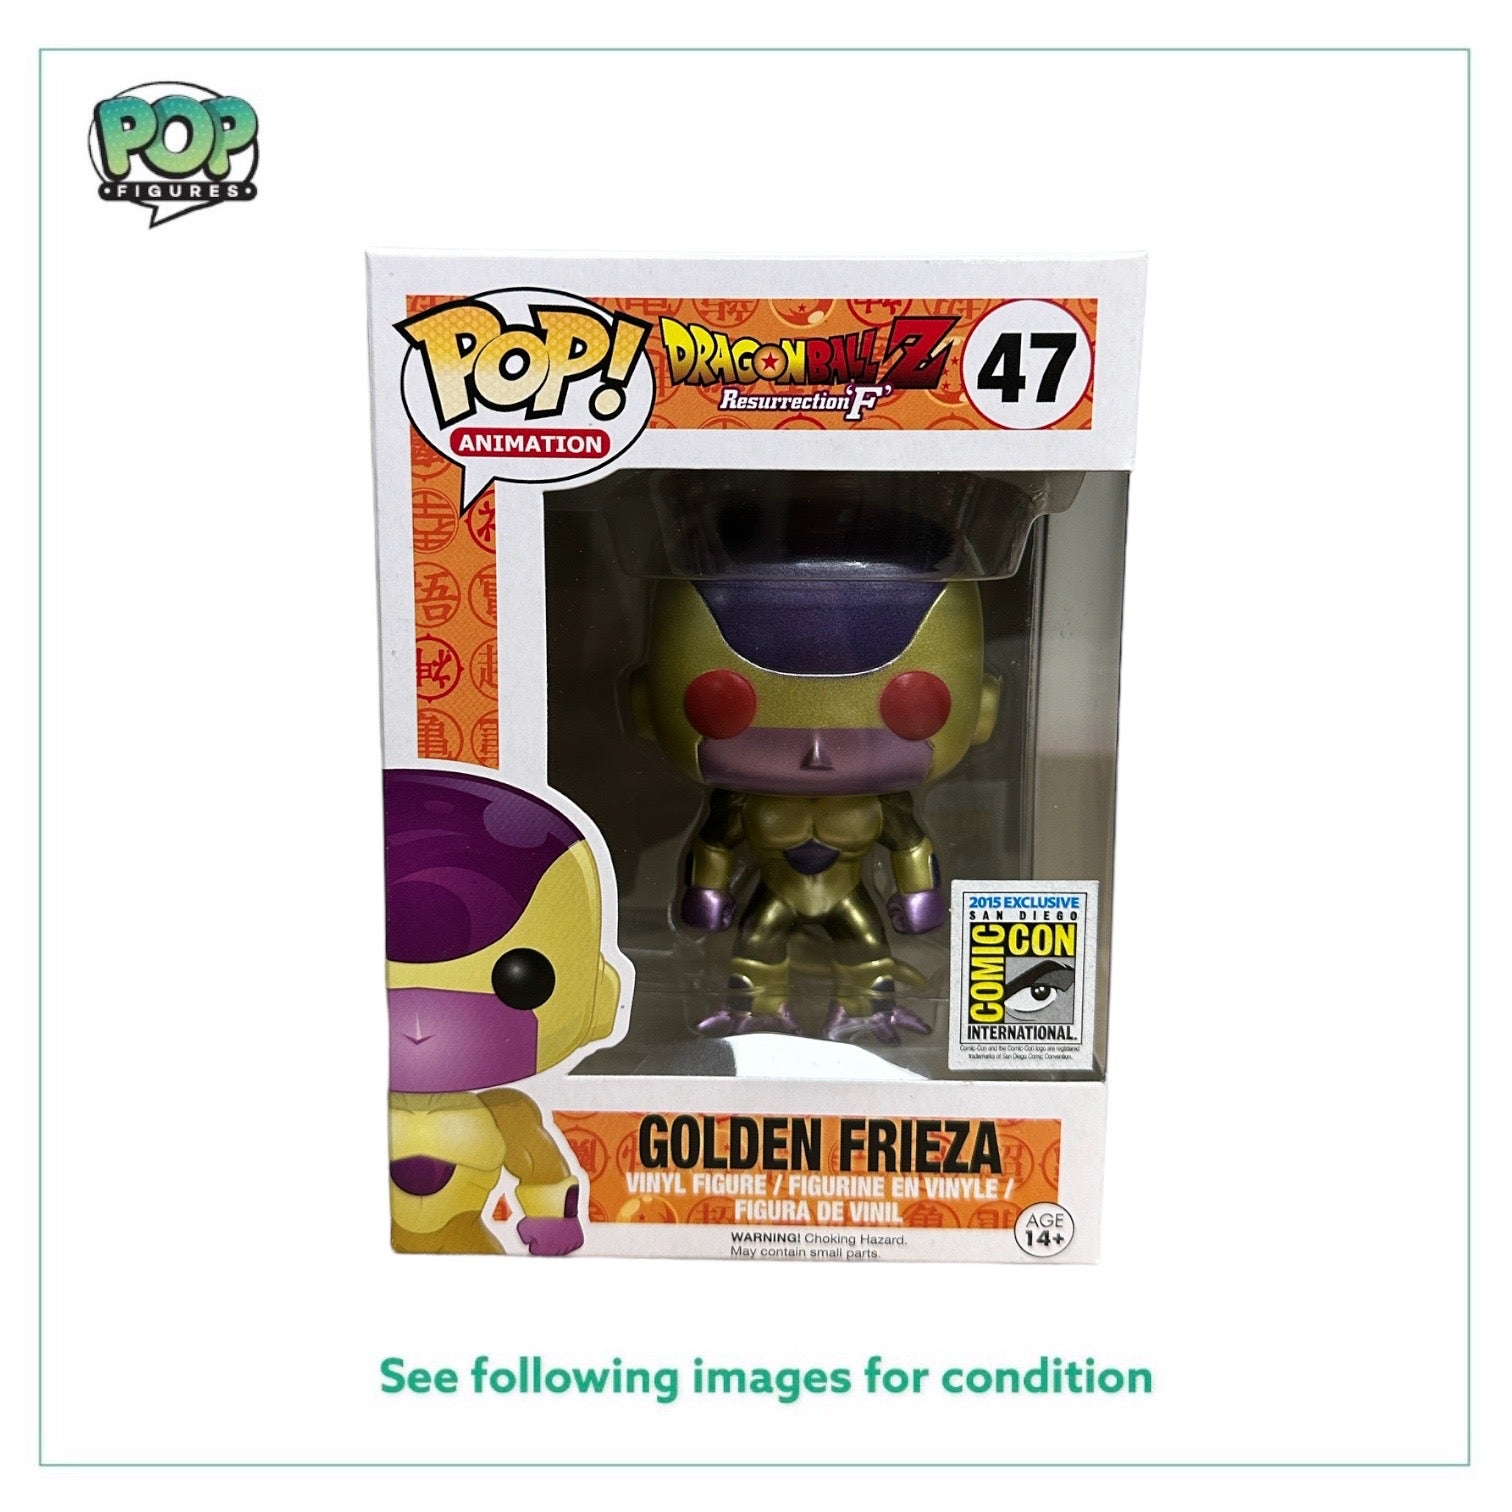 Golden Frieza #47 (Red Eyes) Funko Pop! - Dragon Ball Z Resurrection 'F' - SDCC 2015 Official Convention Exclusive - Condition 8.75/10